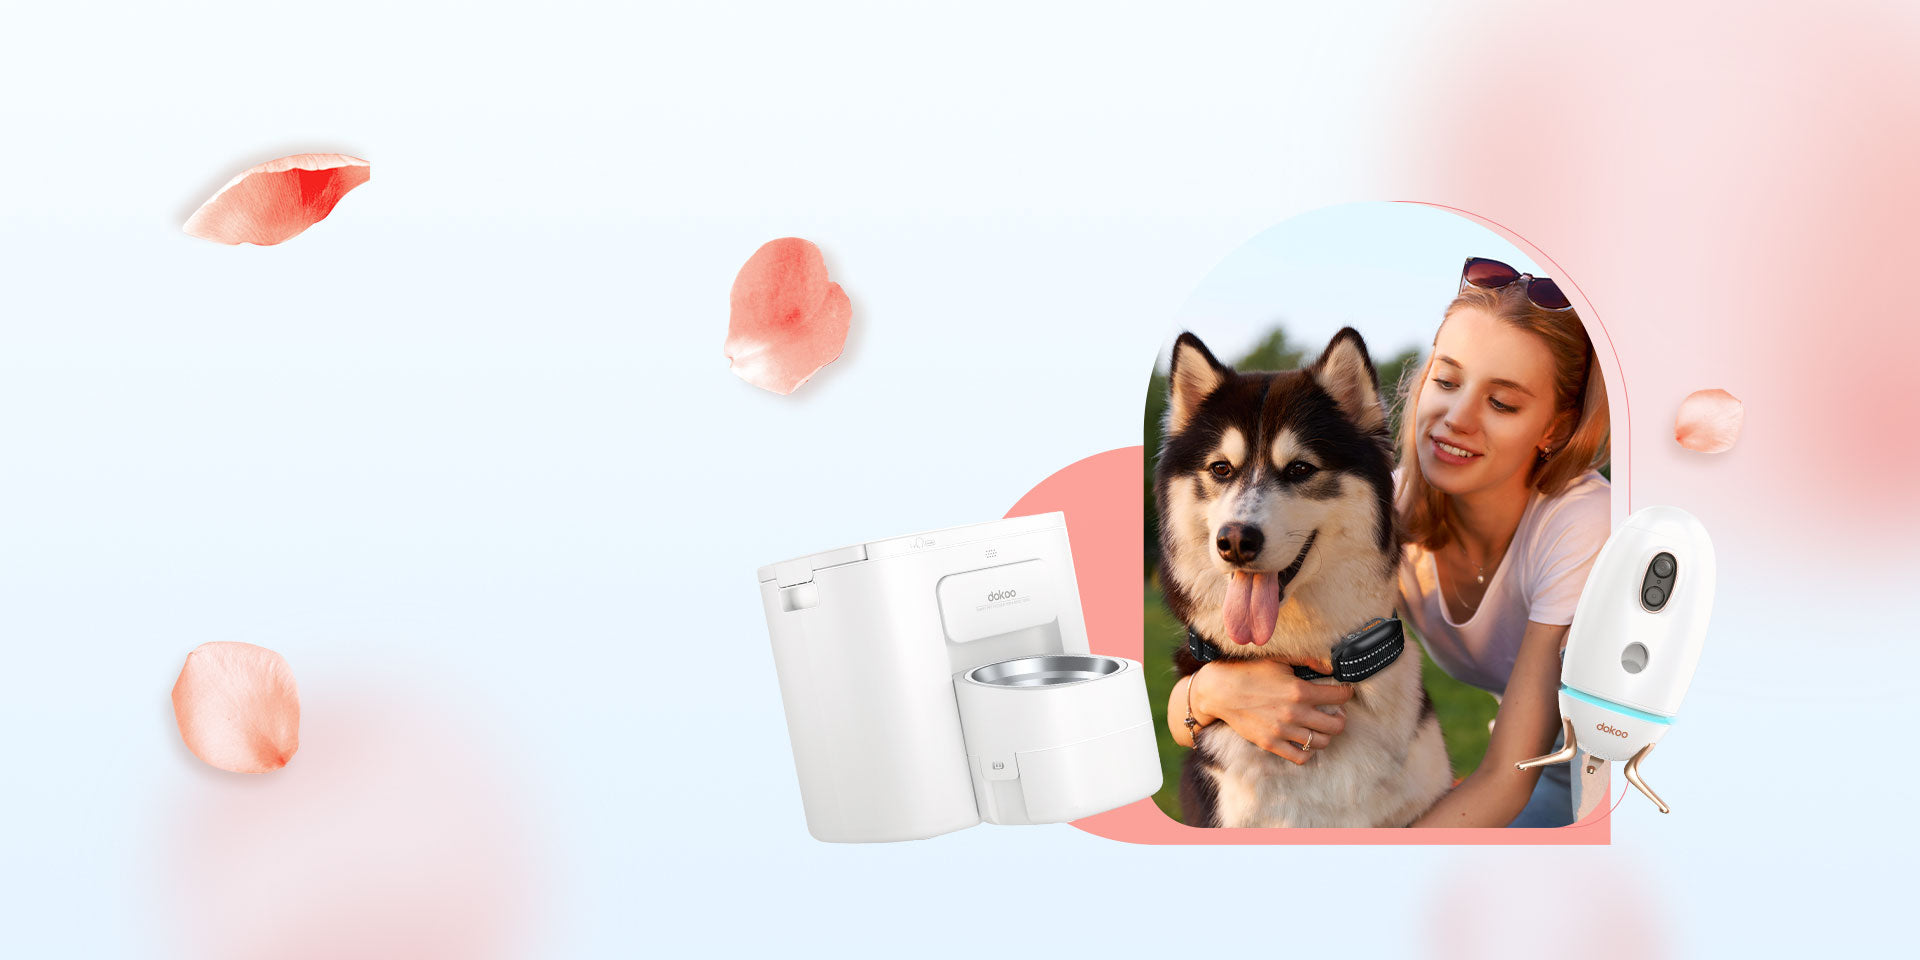 dokoo pet feeder and treat dispenser is the best gift for monther's day